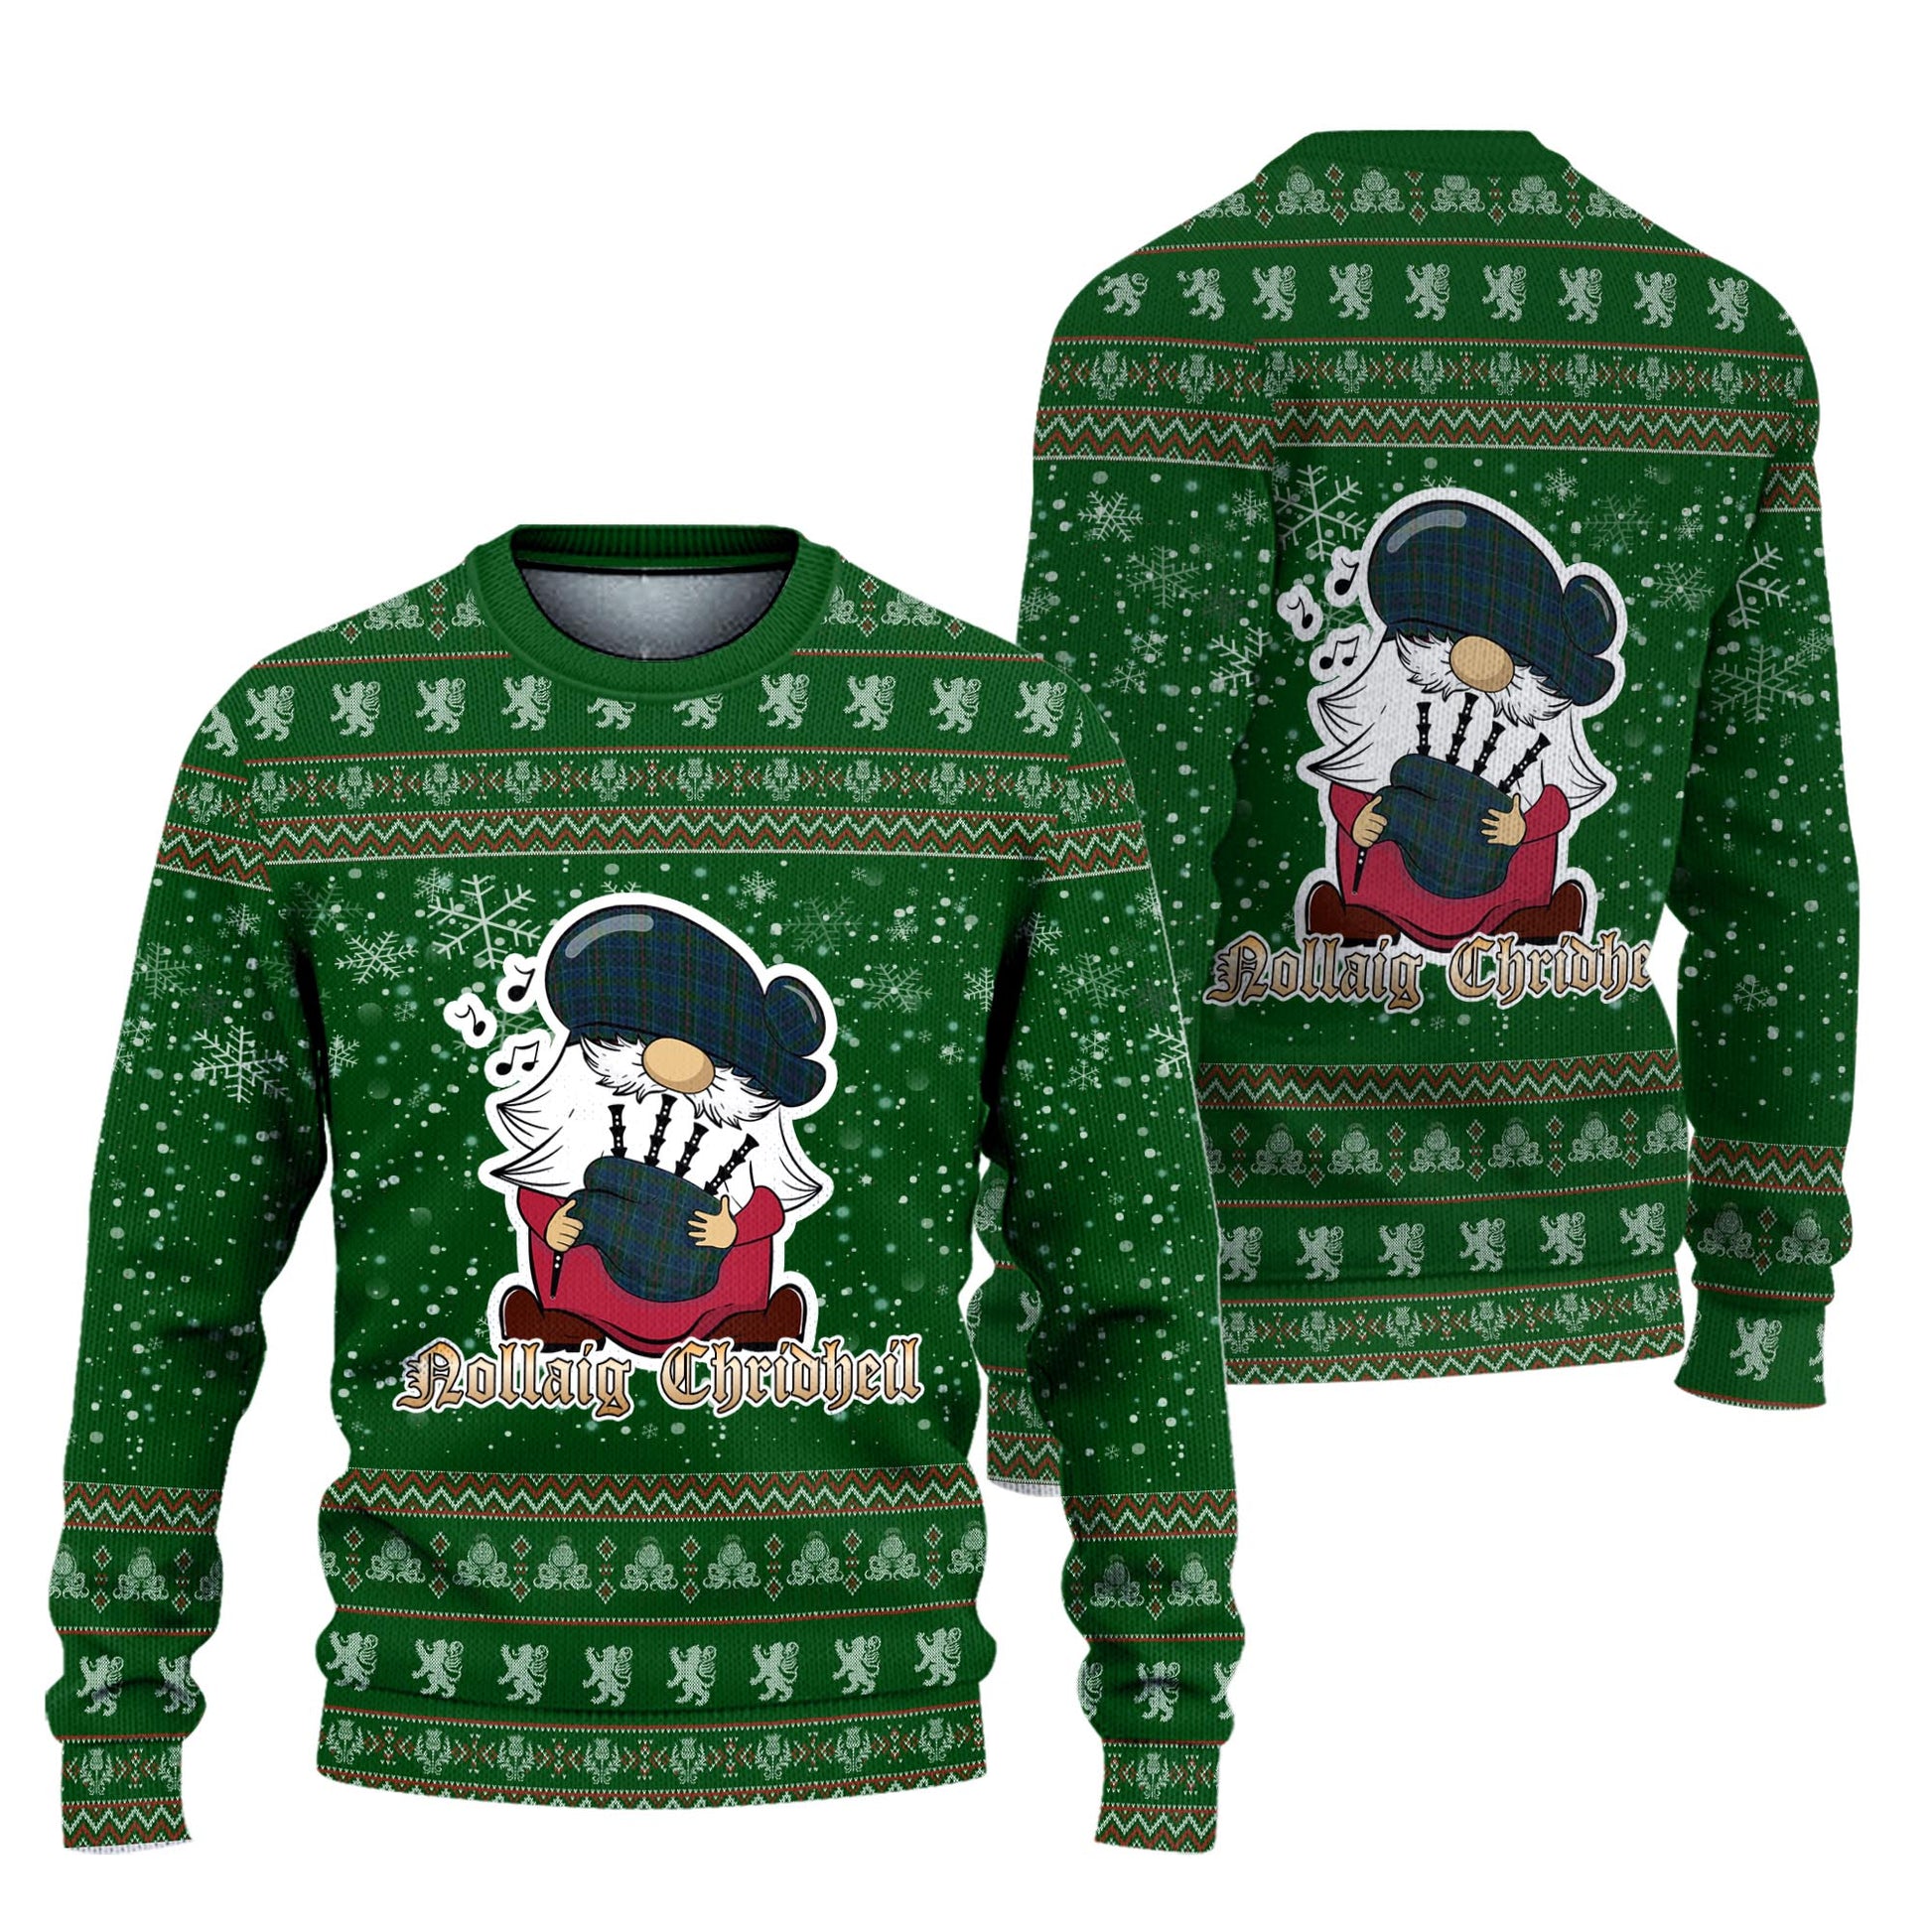 Richard of Wales Clan Christmas Family Knitted Sweater with Funny Gnome Playing Bagpipes Unisex Green - Tartanvibesclothing